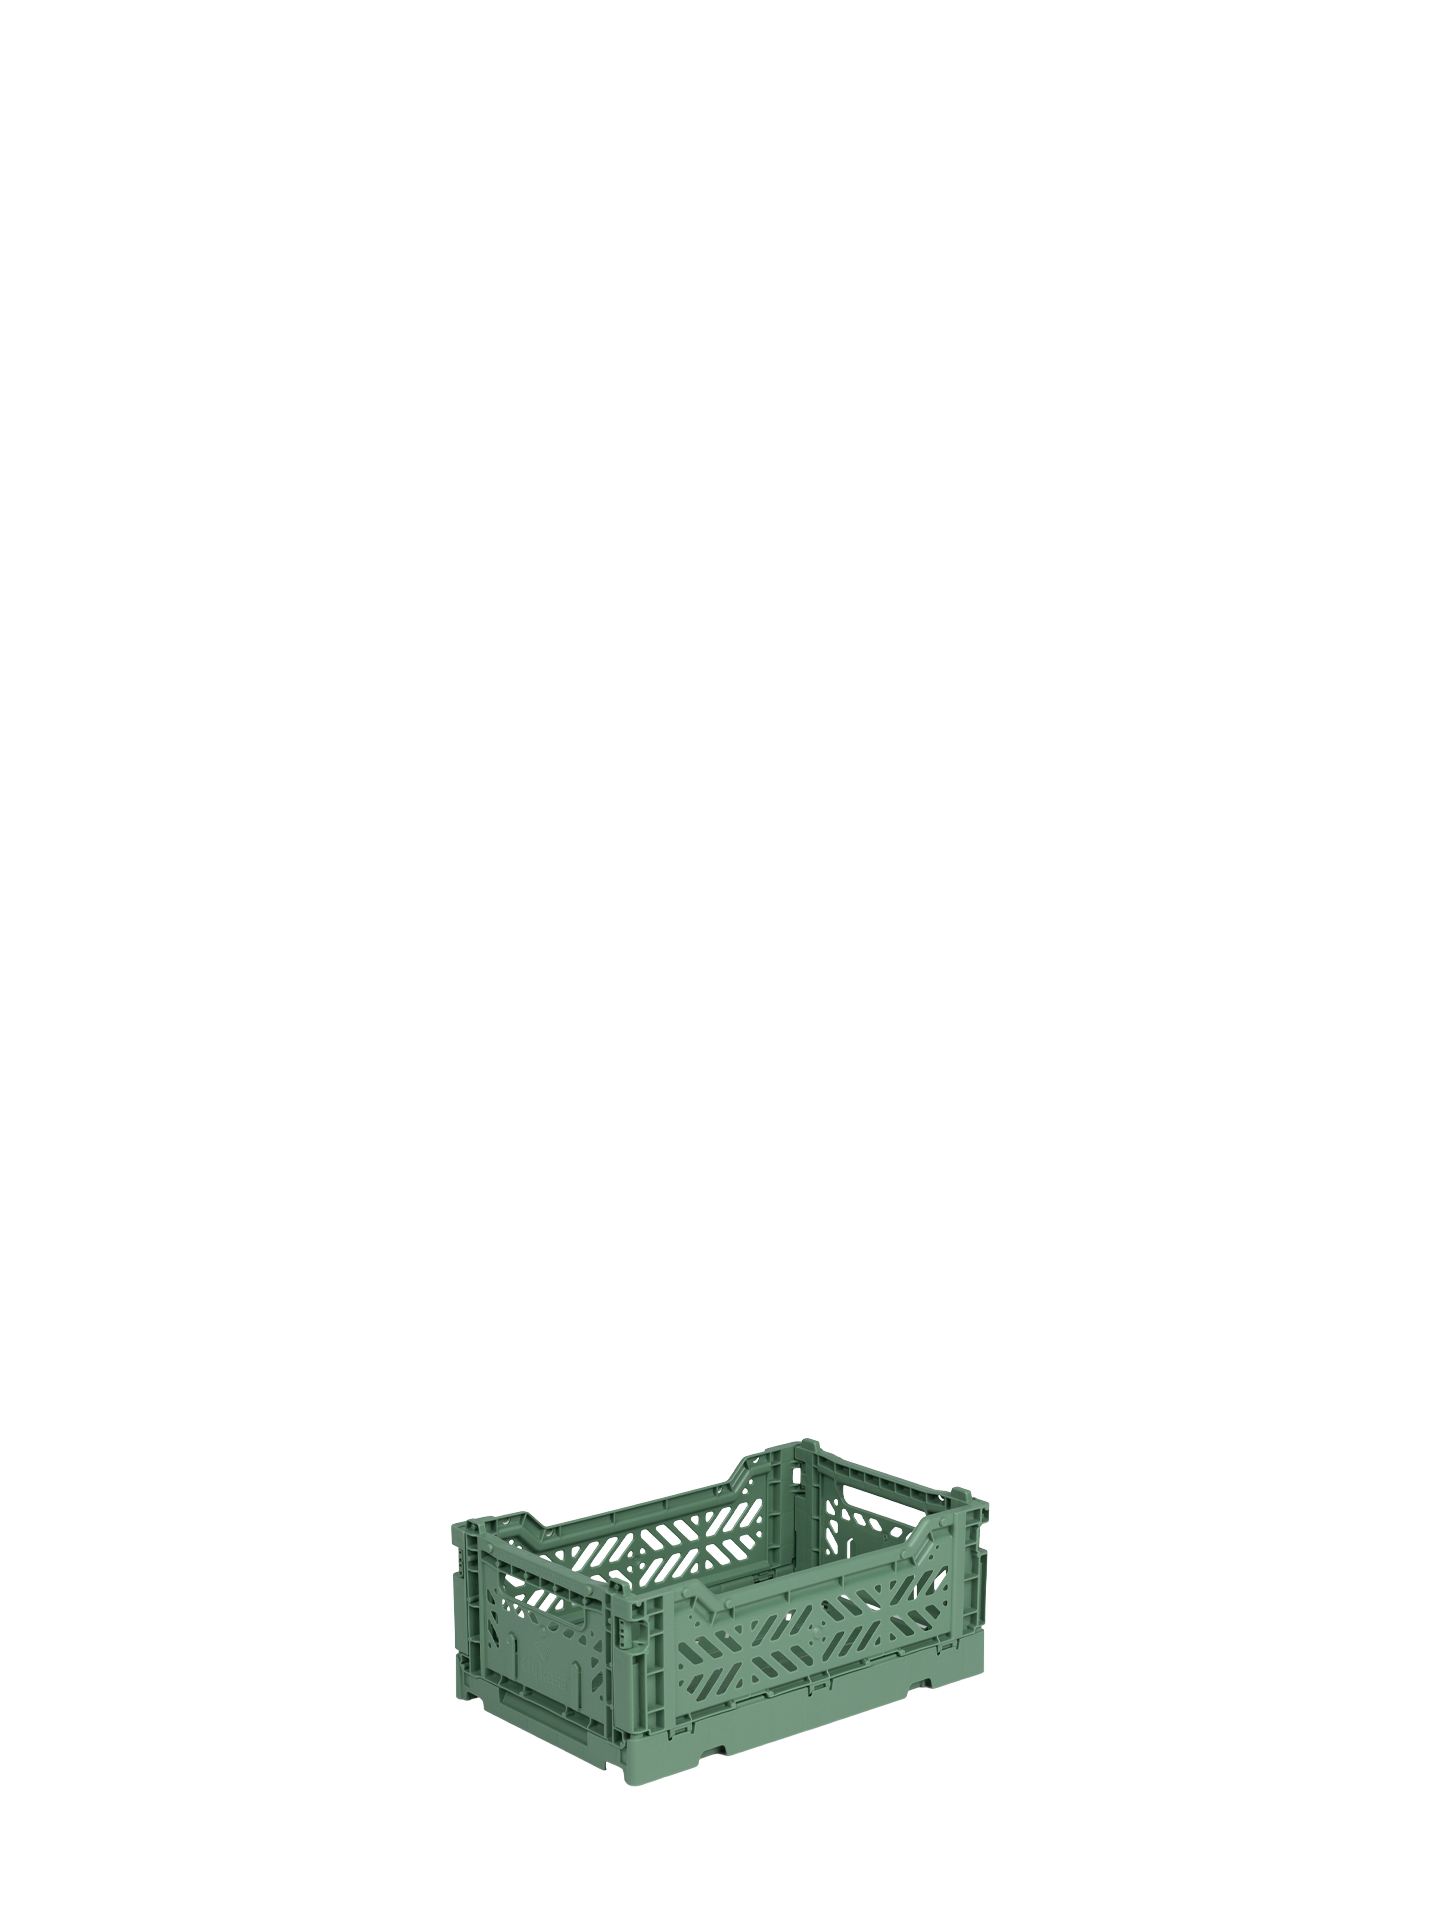 Mini Aykasa crate in lovely sage green is called almond green and it stacks and folds